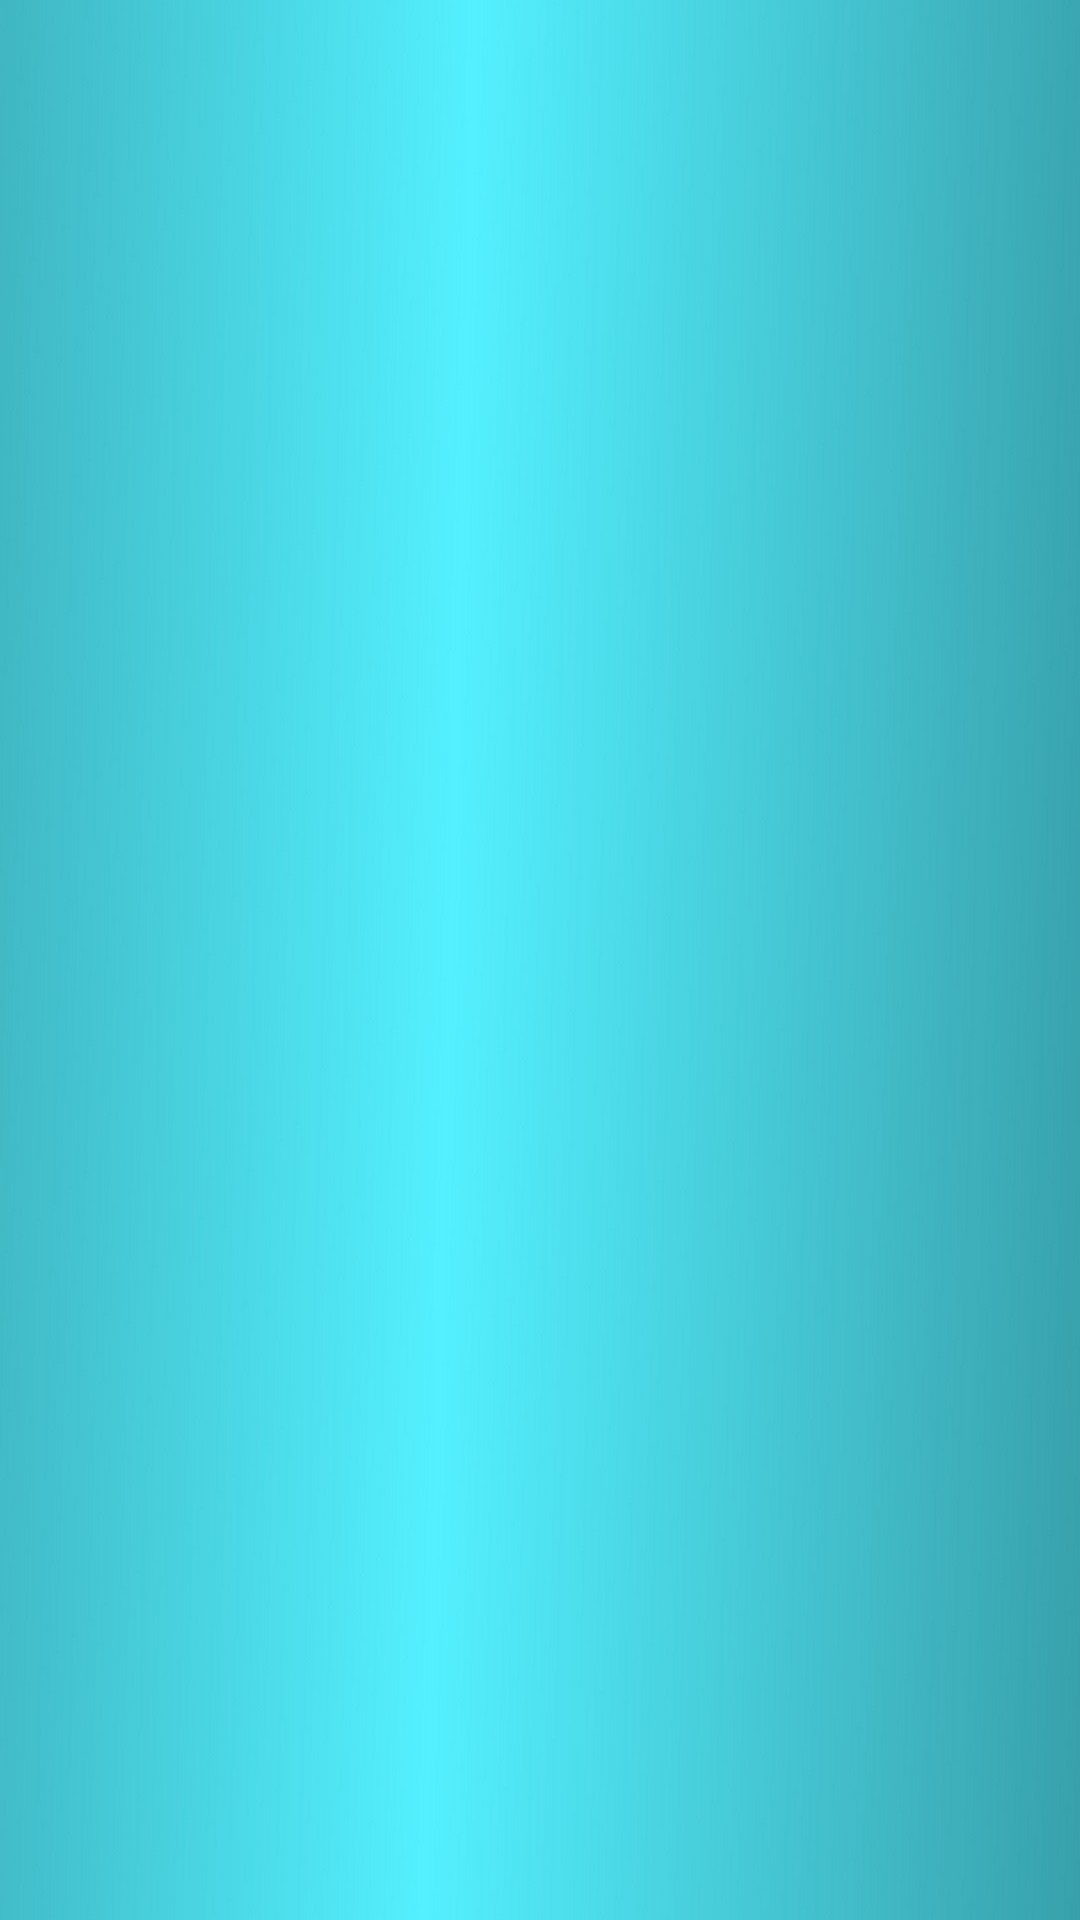 Teal HD Wallpapers For Mobile With Resolution 1080X1920 pixel. You can make this wallpaper for your Desktop Computer Backgrounds, Mac Wallpapers, Android Lock screen or iPhone Screensavers